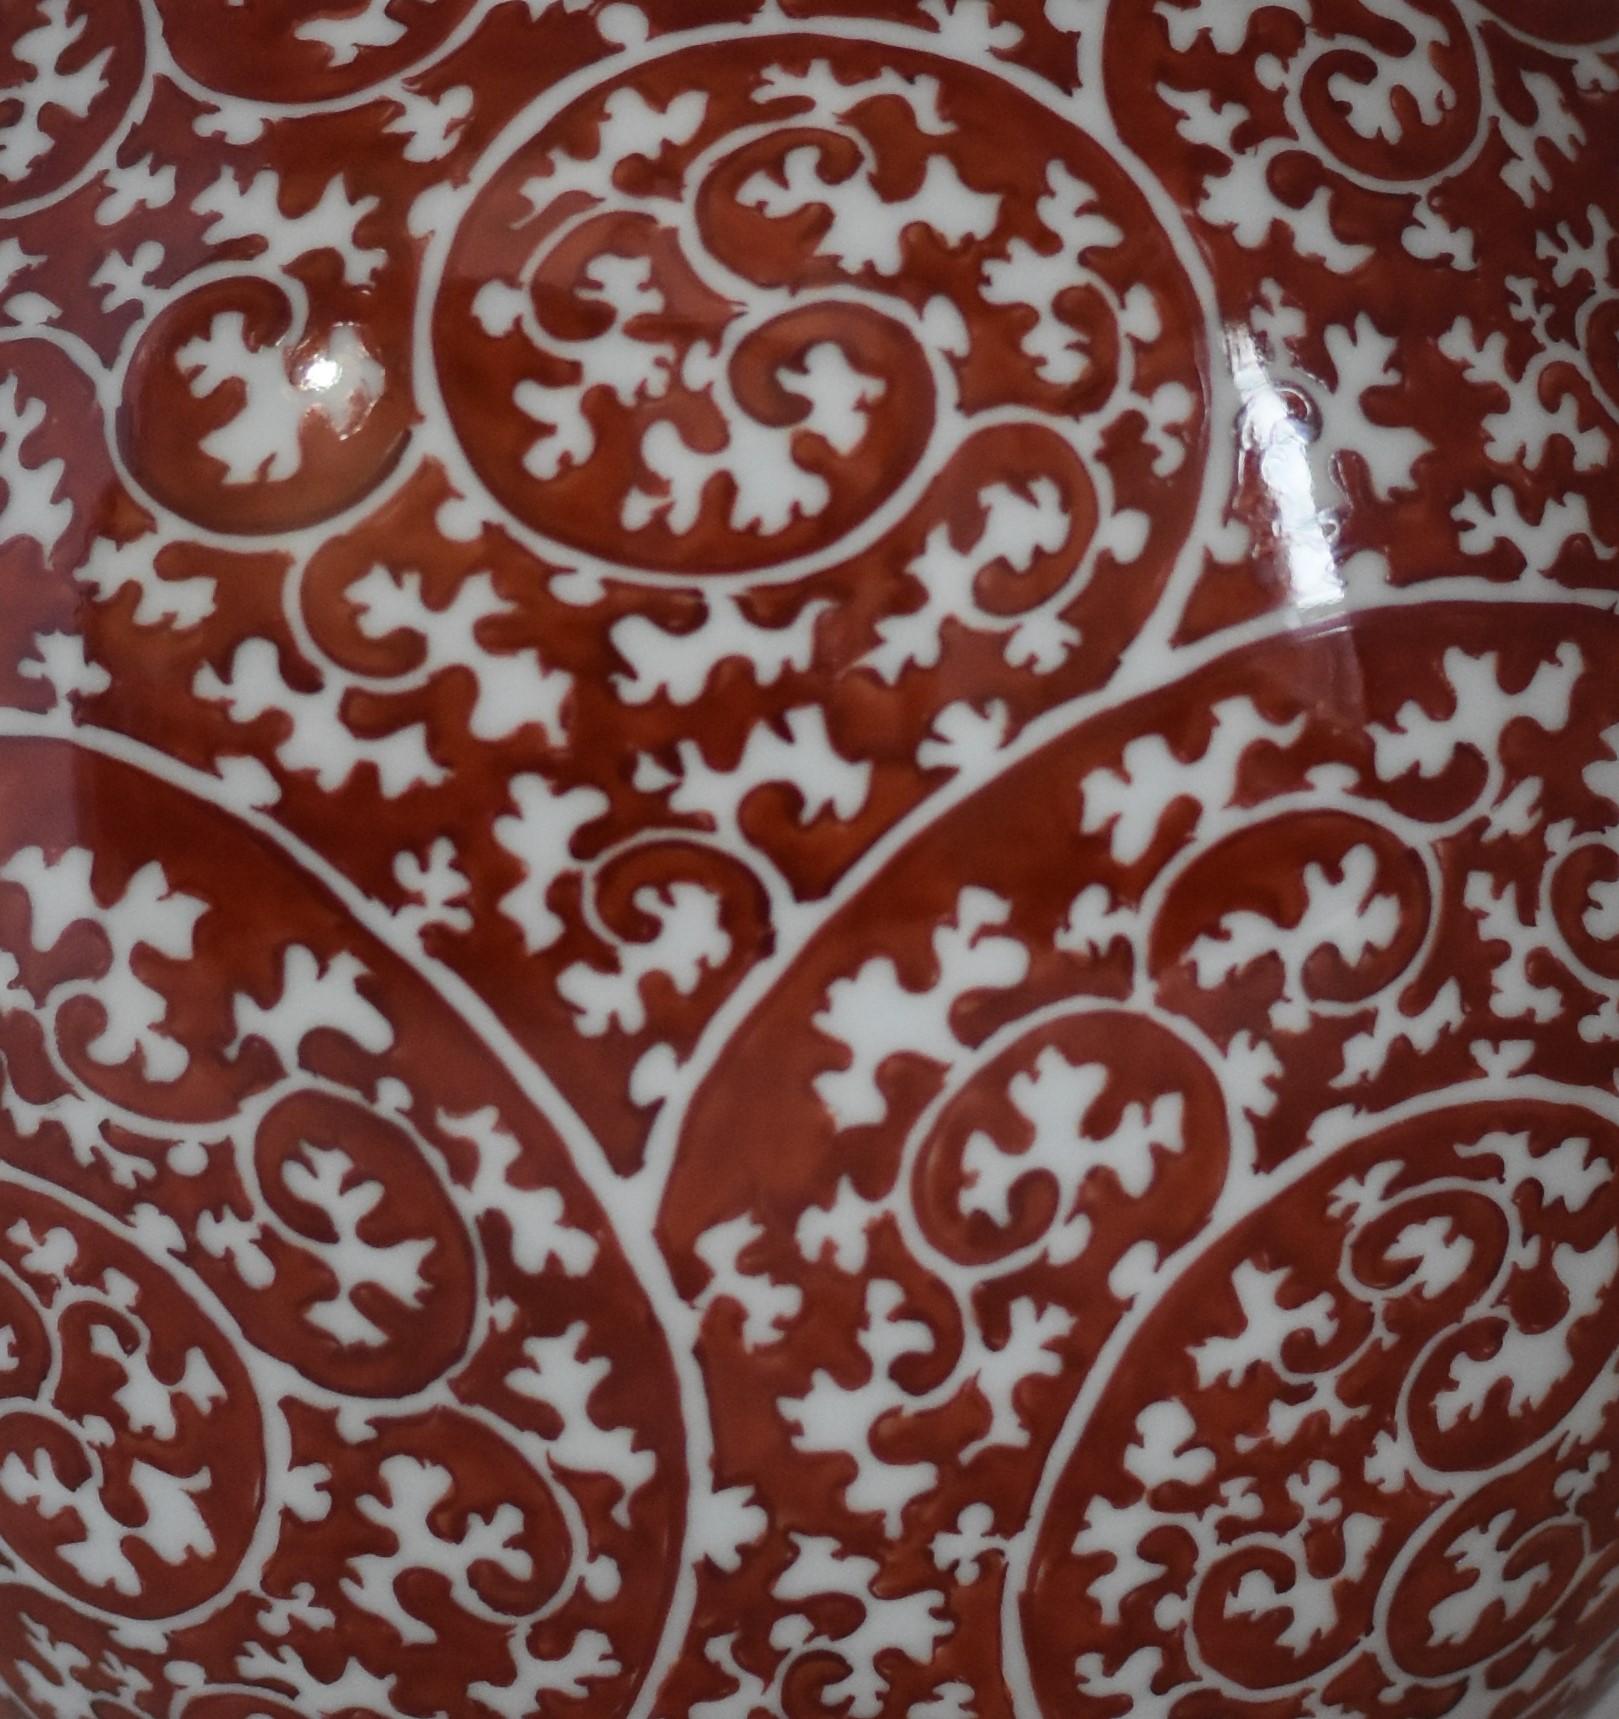 Japanese contemporary hand-painted Imari porcelain vase, the work of acclaimed award-winning master porcelain artist from Imari-Arita region in Japan. This stunning vase features a traditional Arita arabesque pattern in deep red. To this, the artist